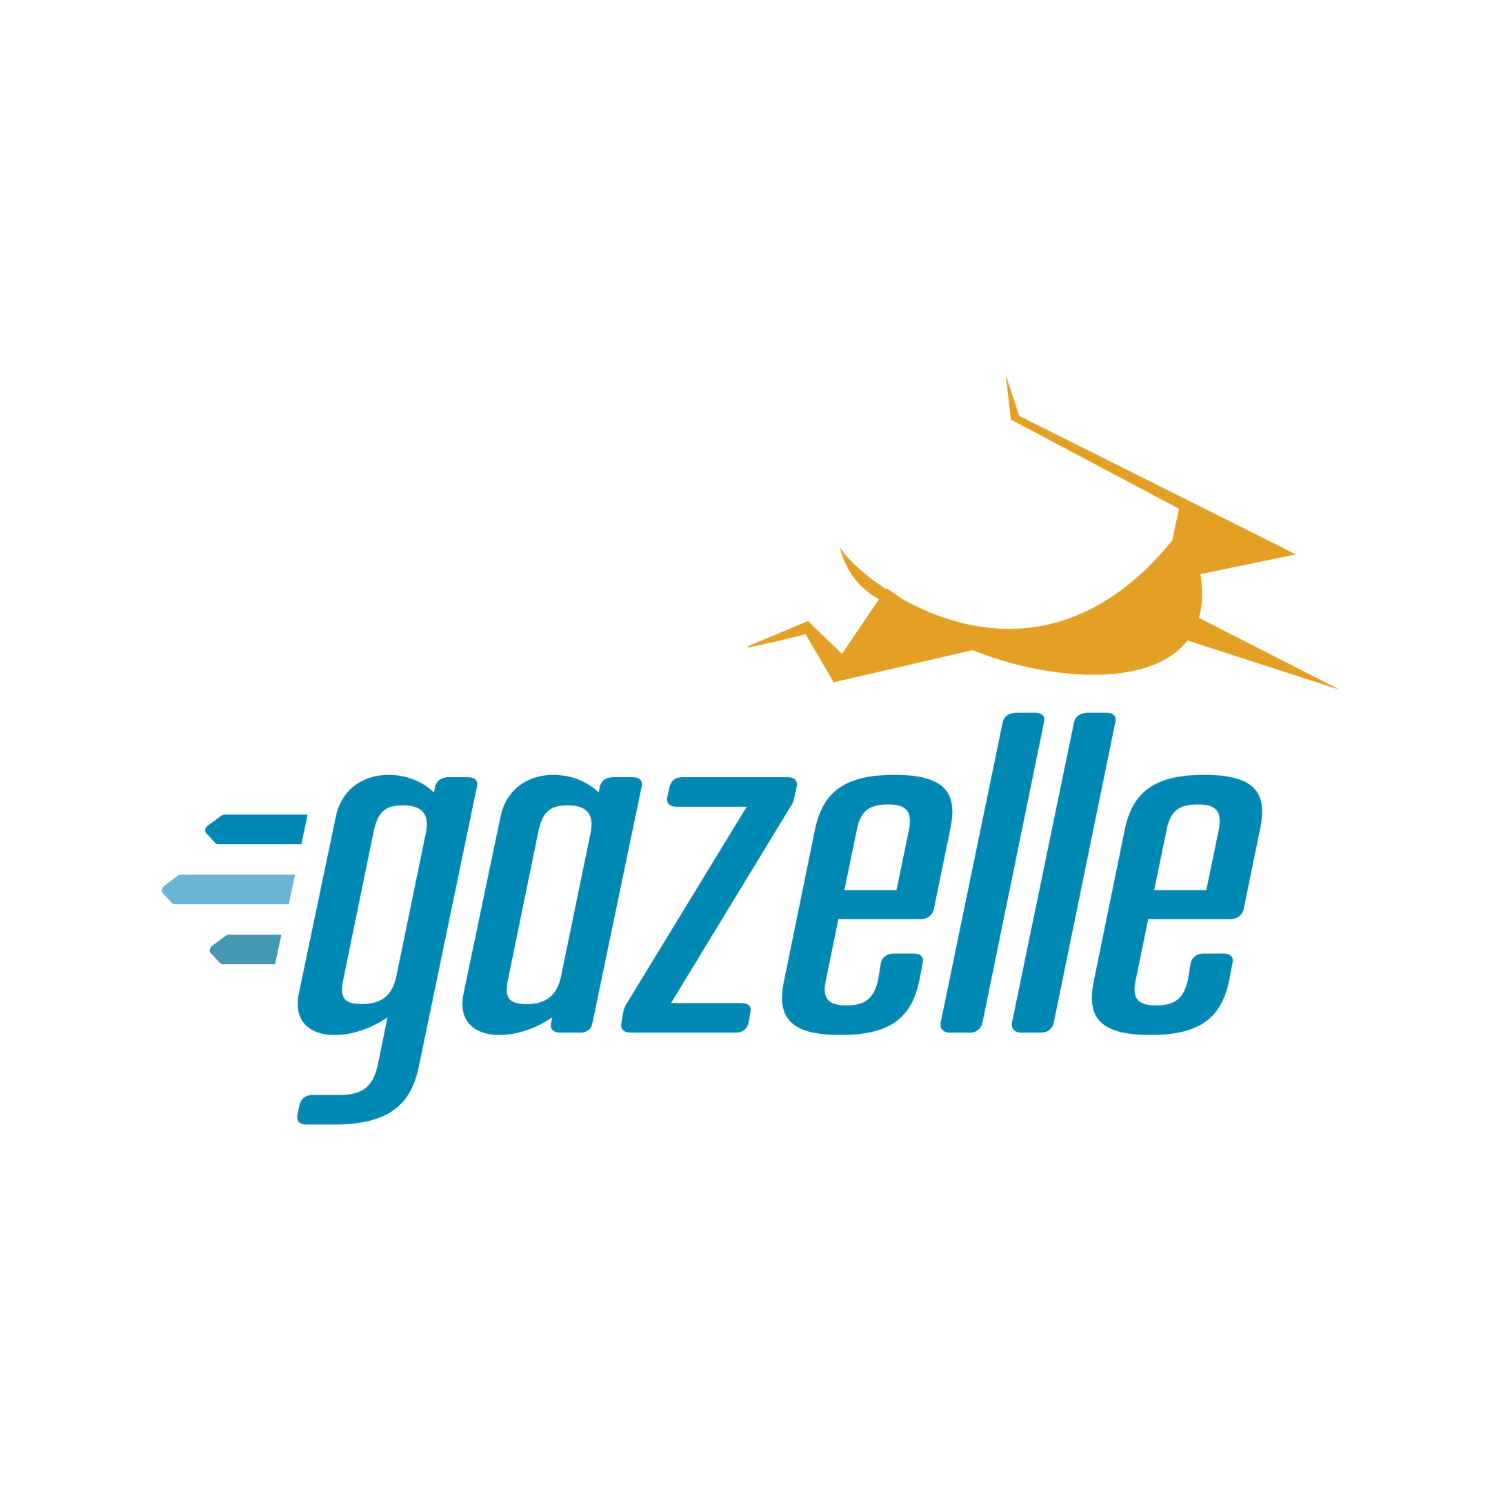 Gazelle – orGAniZing accELaration for high-potentiaL innovativE SMEs